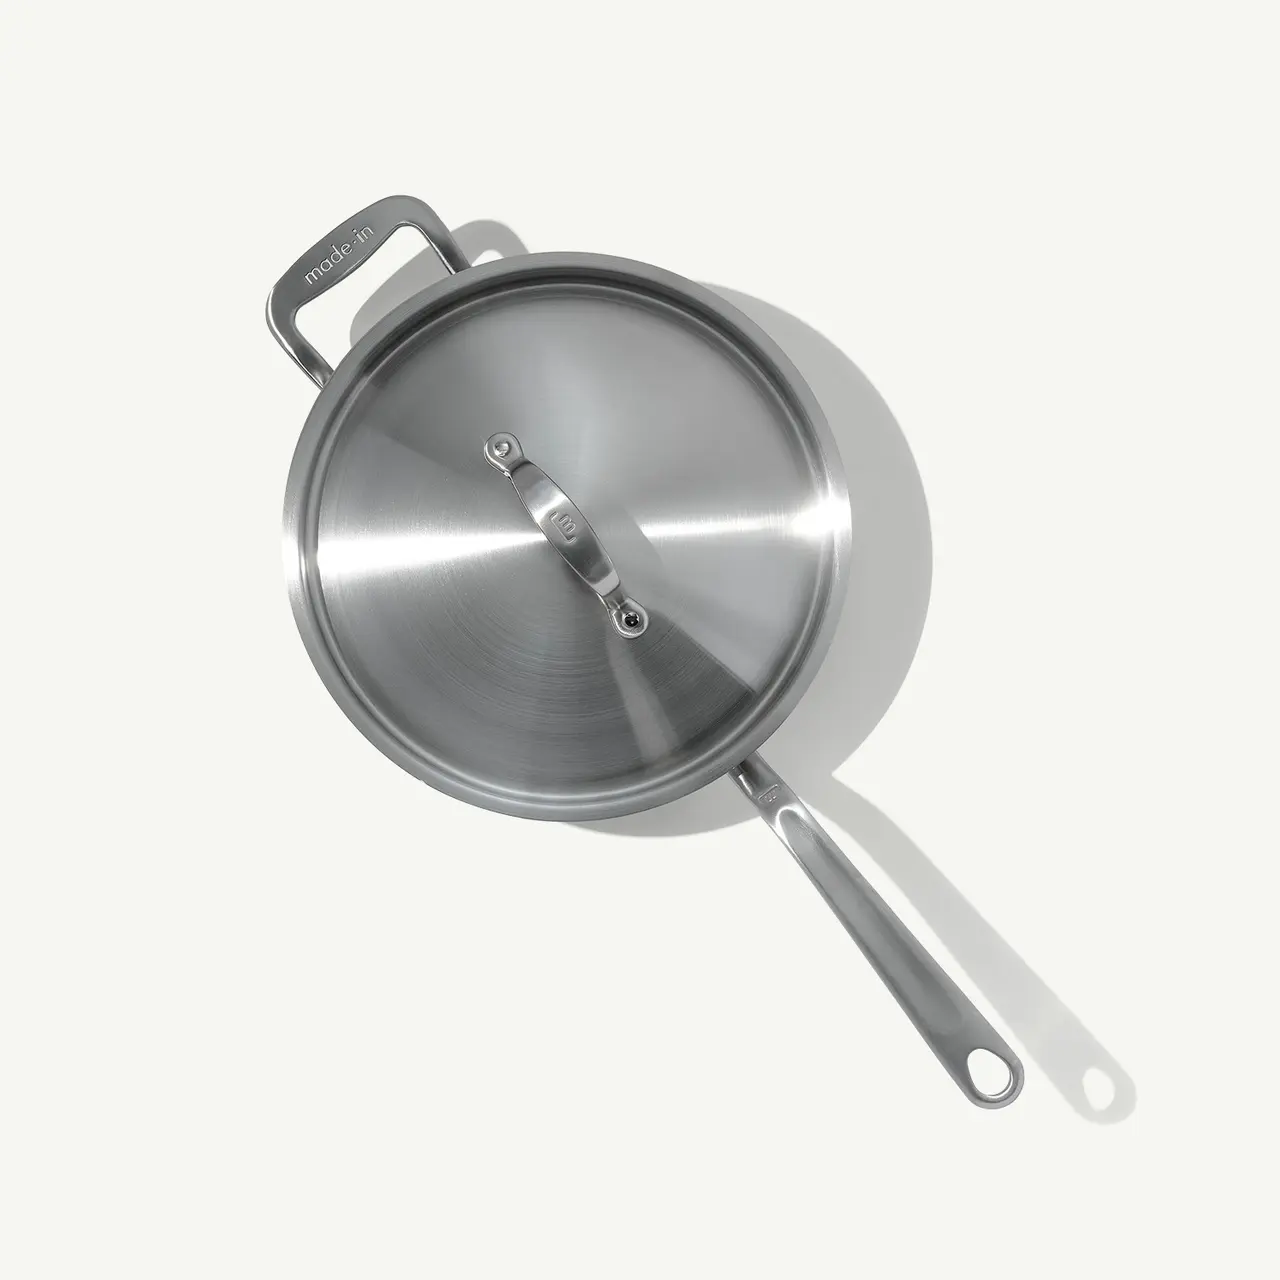 A stainless steel frying pan with a lid, viewed from above against a light background.